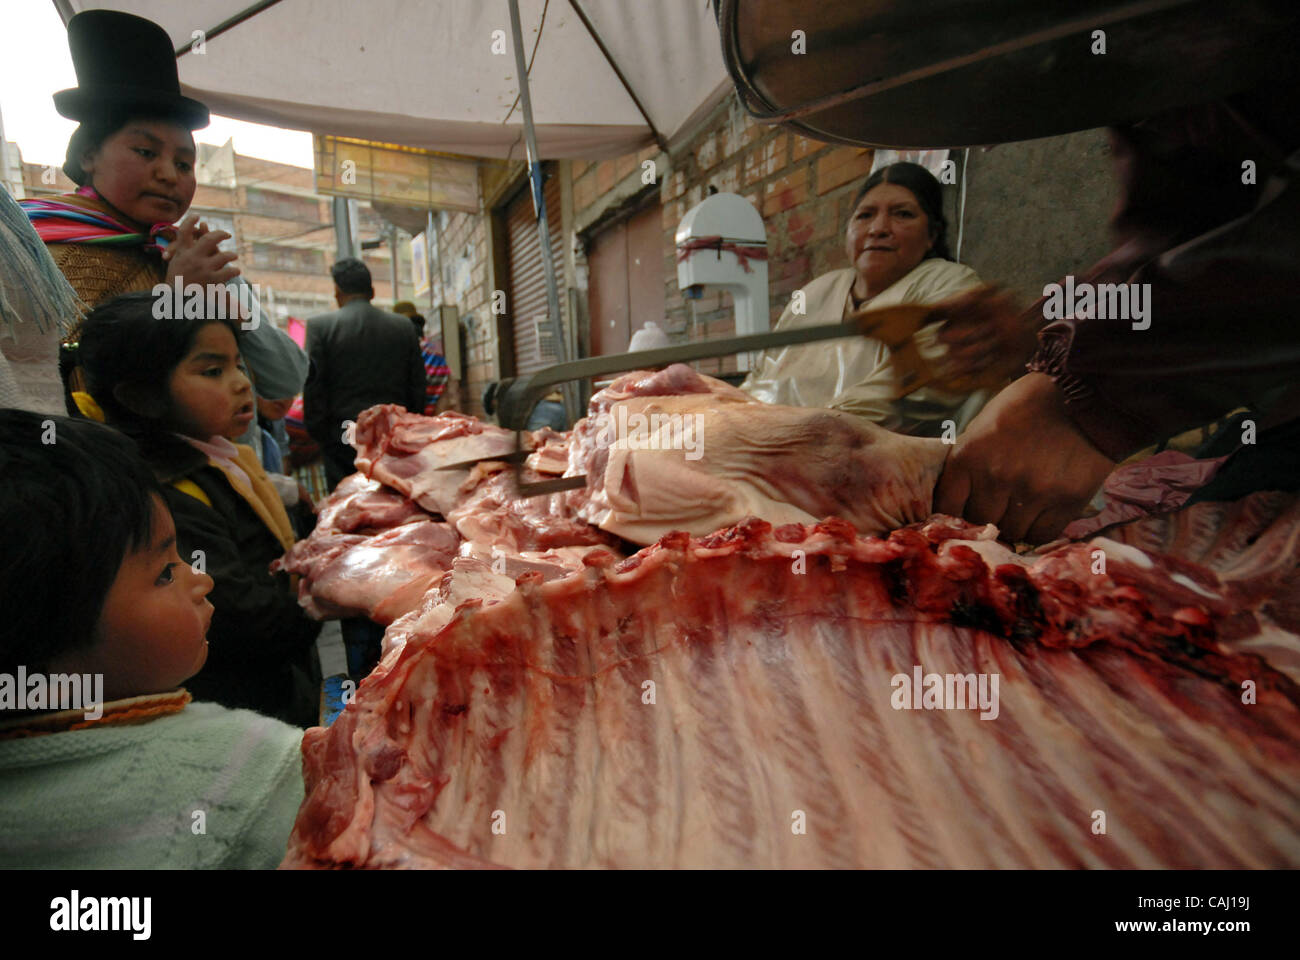 Dec 31, 2007 - La Paz, Bolivia - A family waits for their pork meat to be cut in La Paz Garita de Lima's street market. Every 31st December in La Paz, thousands of dead pigs are brought to the city to be sold, coming from Cochabamba, Santa Cruz and all La Paz areas. The bolivian tradition to eat por Stock Photo